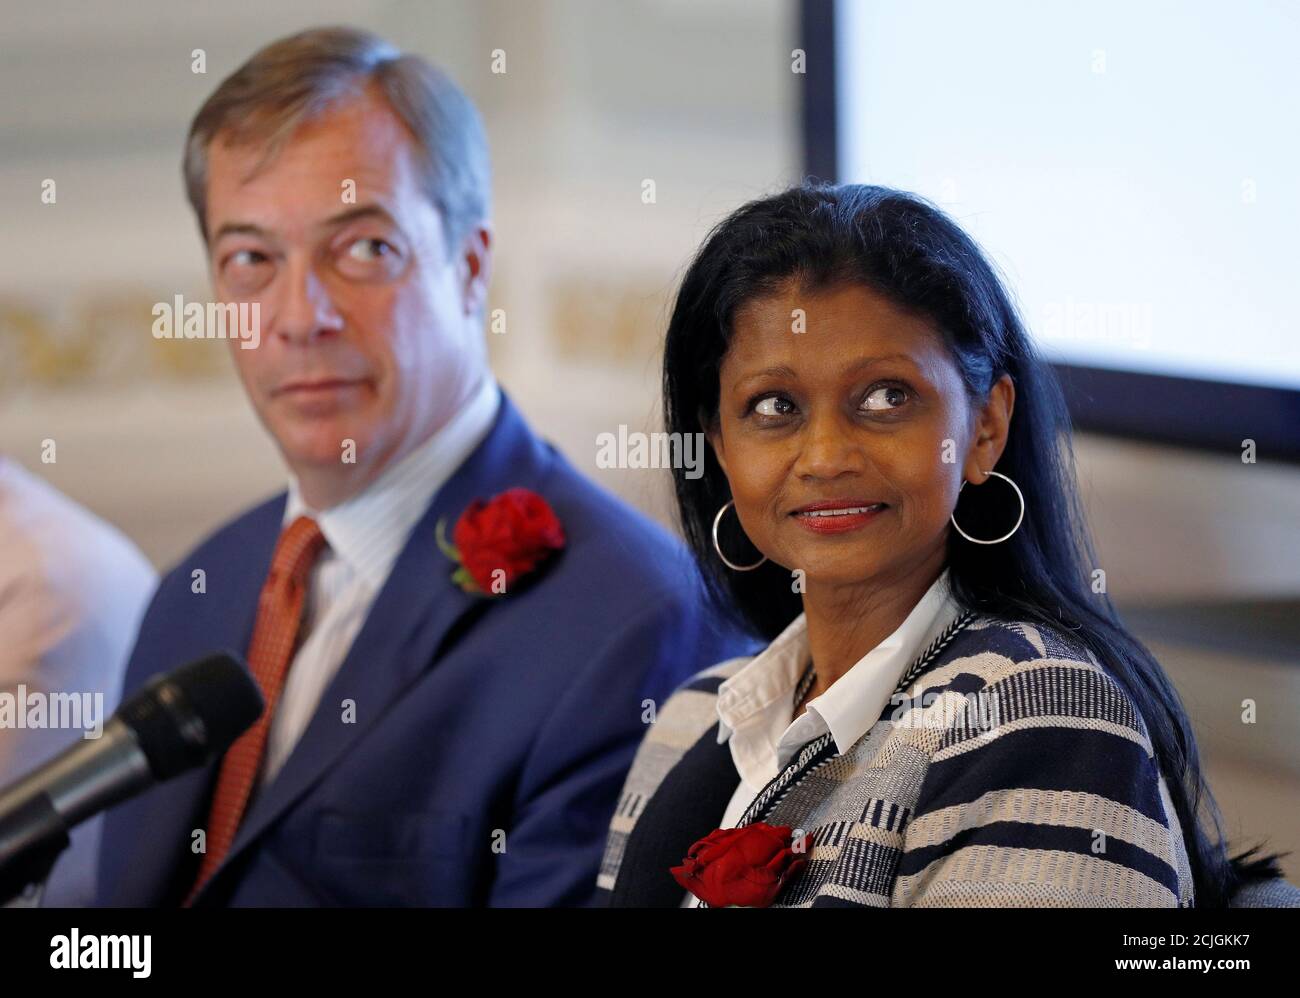 Brexit campaigner and Member of the European Parliament Nigel Farage and Christina Jordan, a candidate of Brexit party, look on during a news conference by the 'Brexit Party' campaign for the